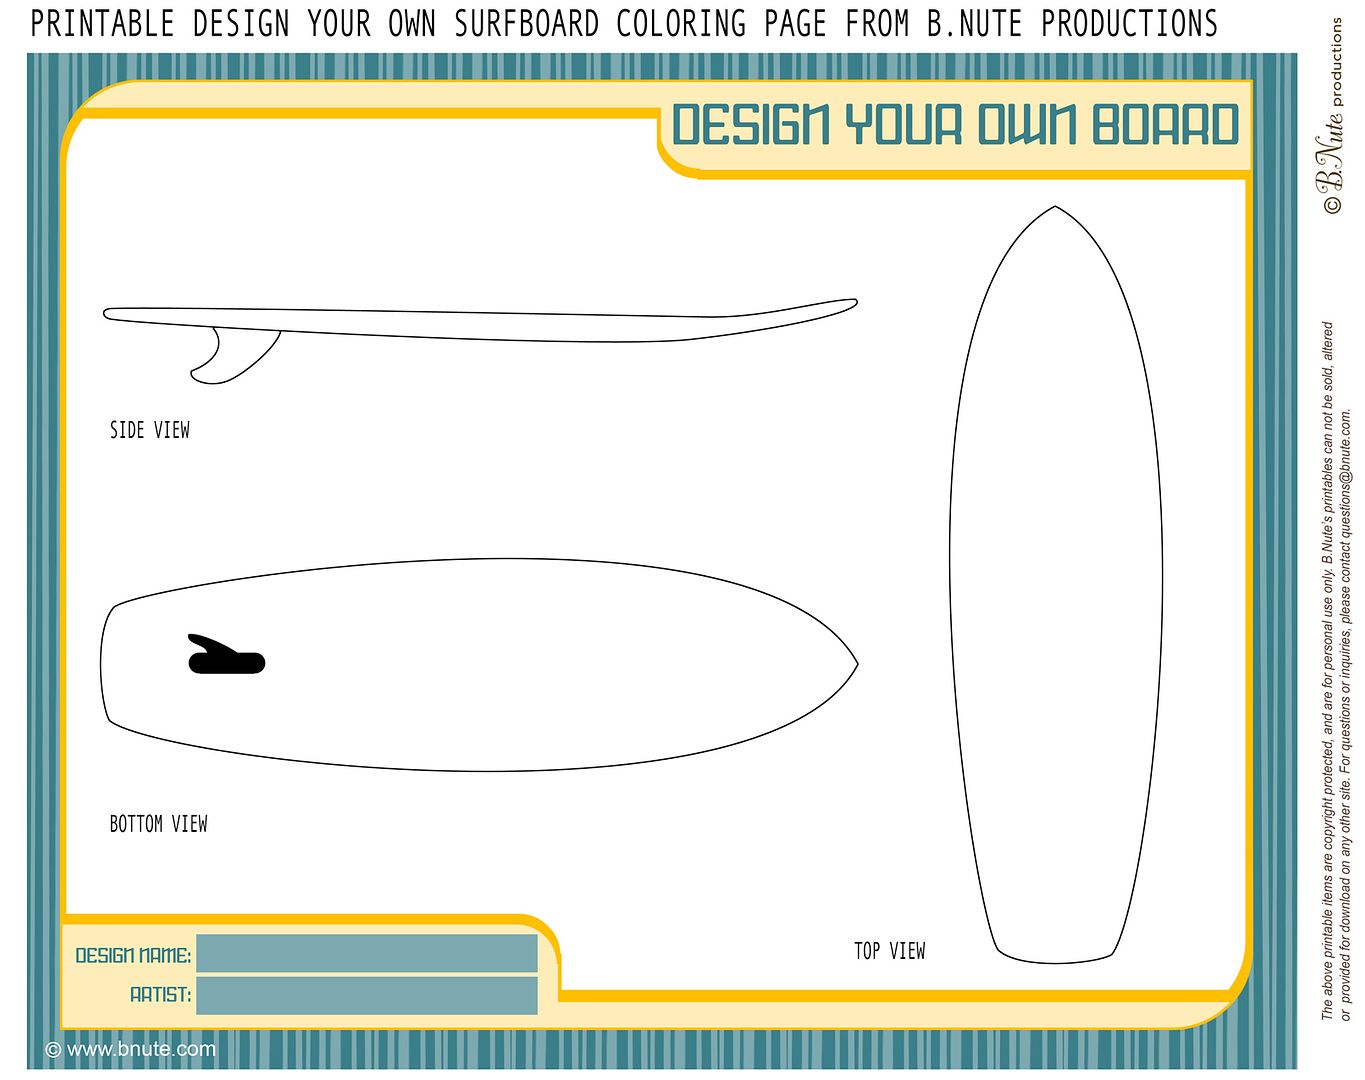 Free printable summer coloring pages: Design Your Own Surfboard coloring page | bnute productions